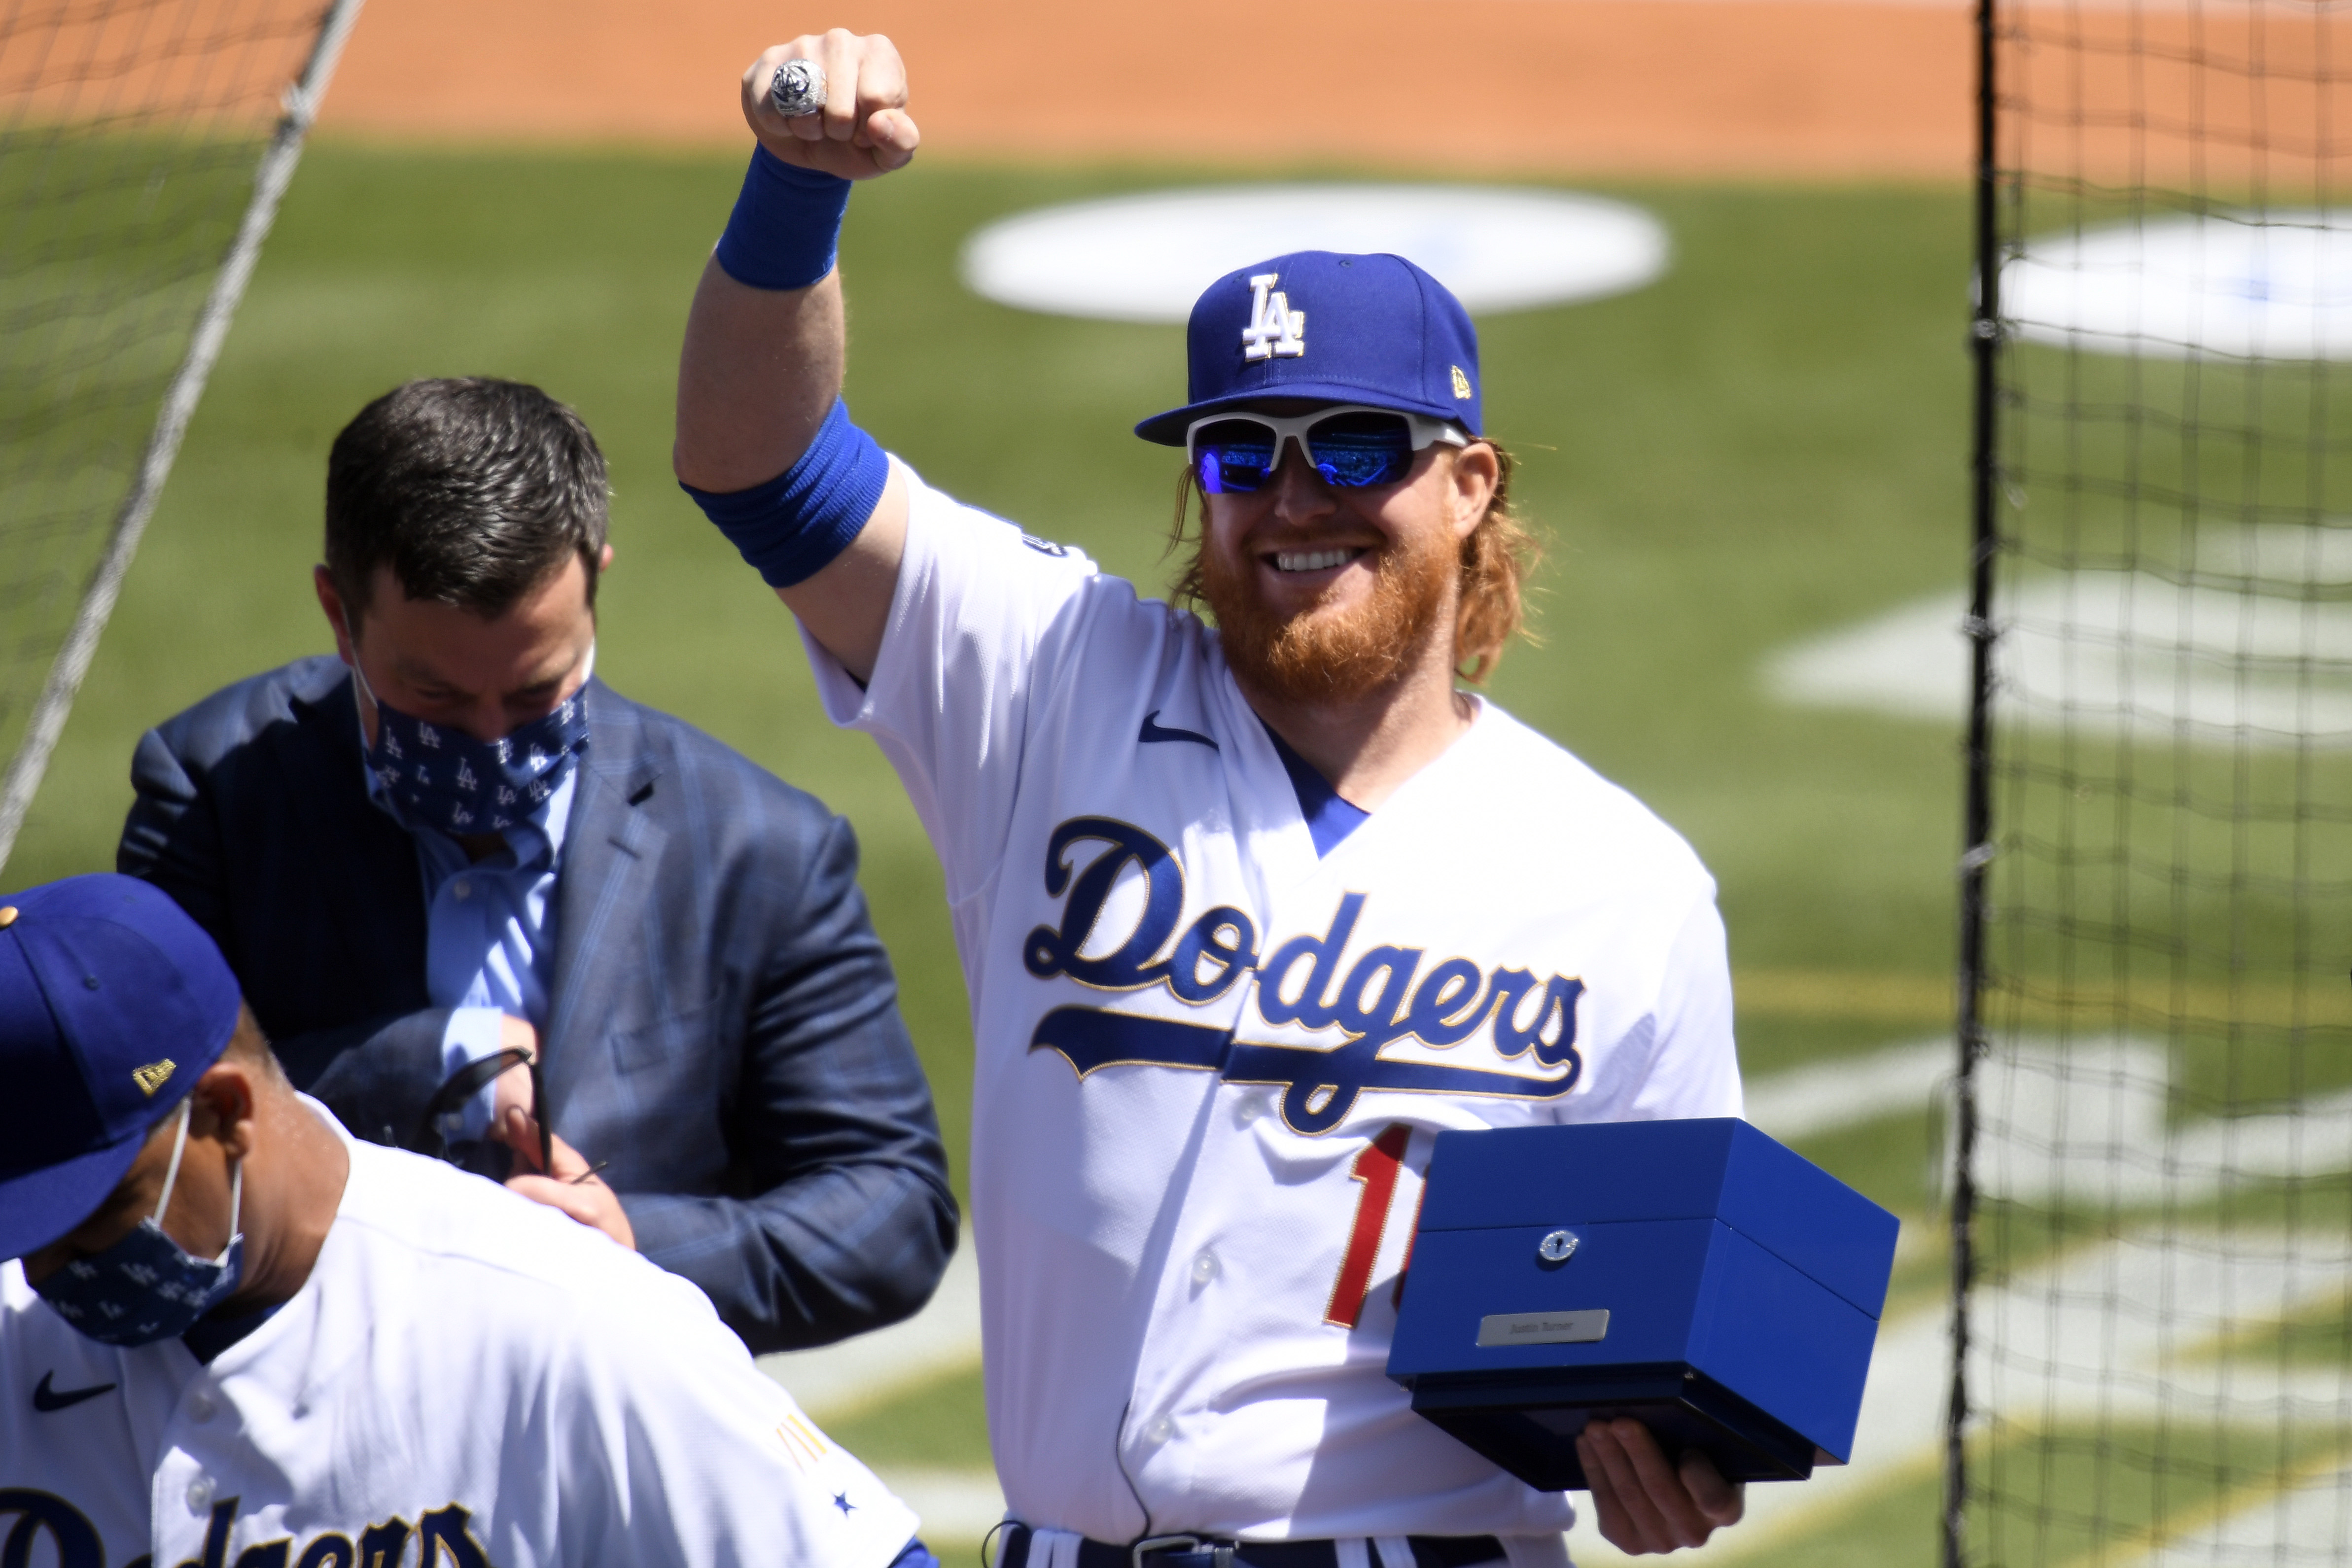 Dodger Stadium Opening Day: The Best Images From The Dodgers Home